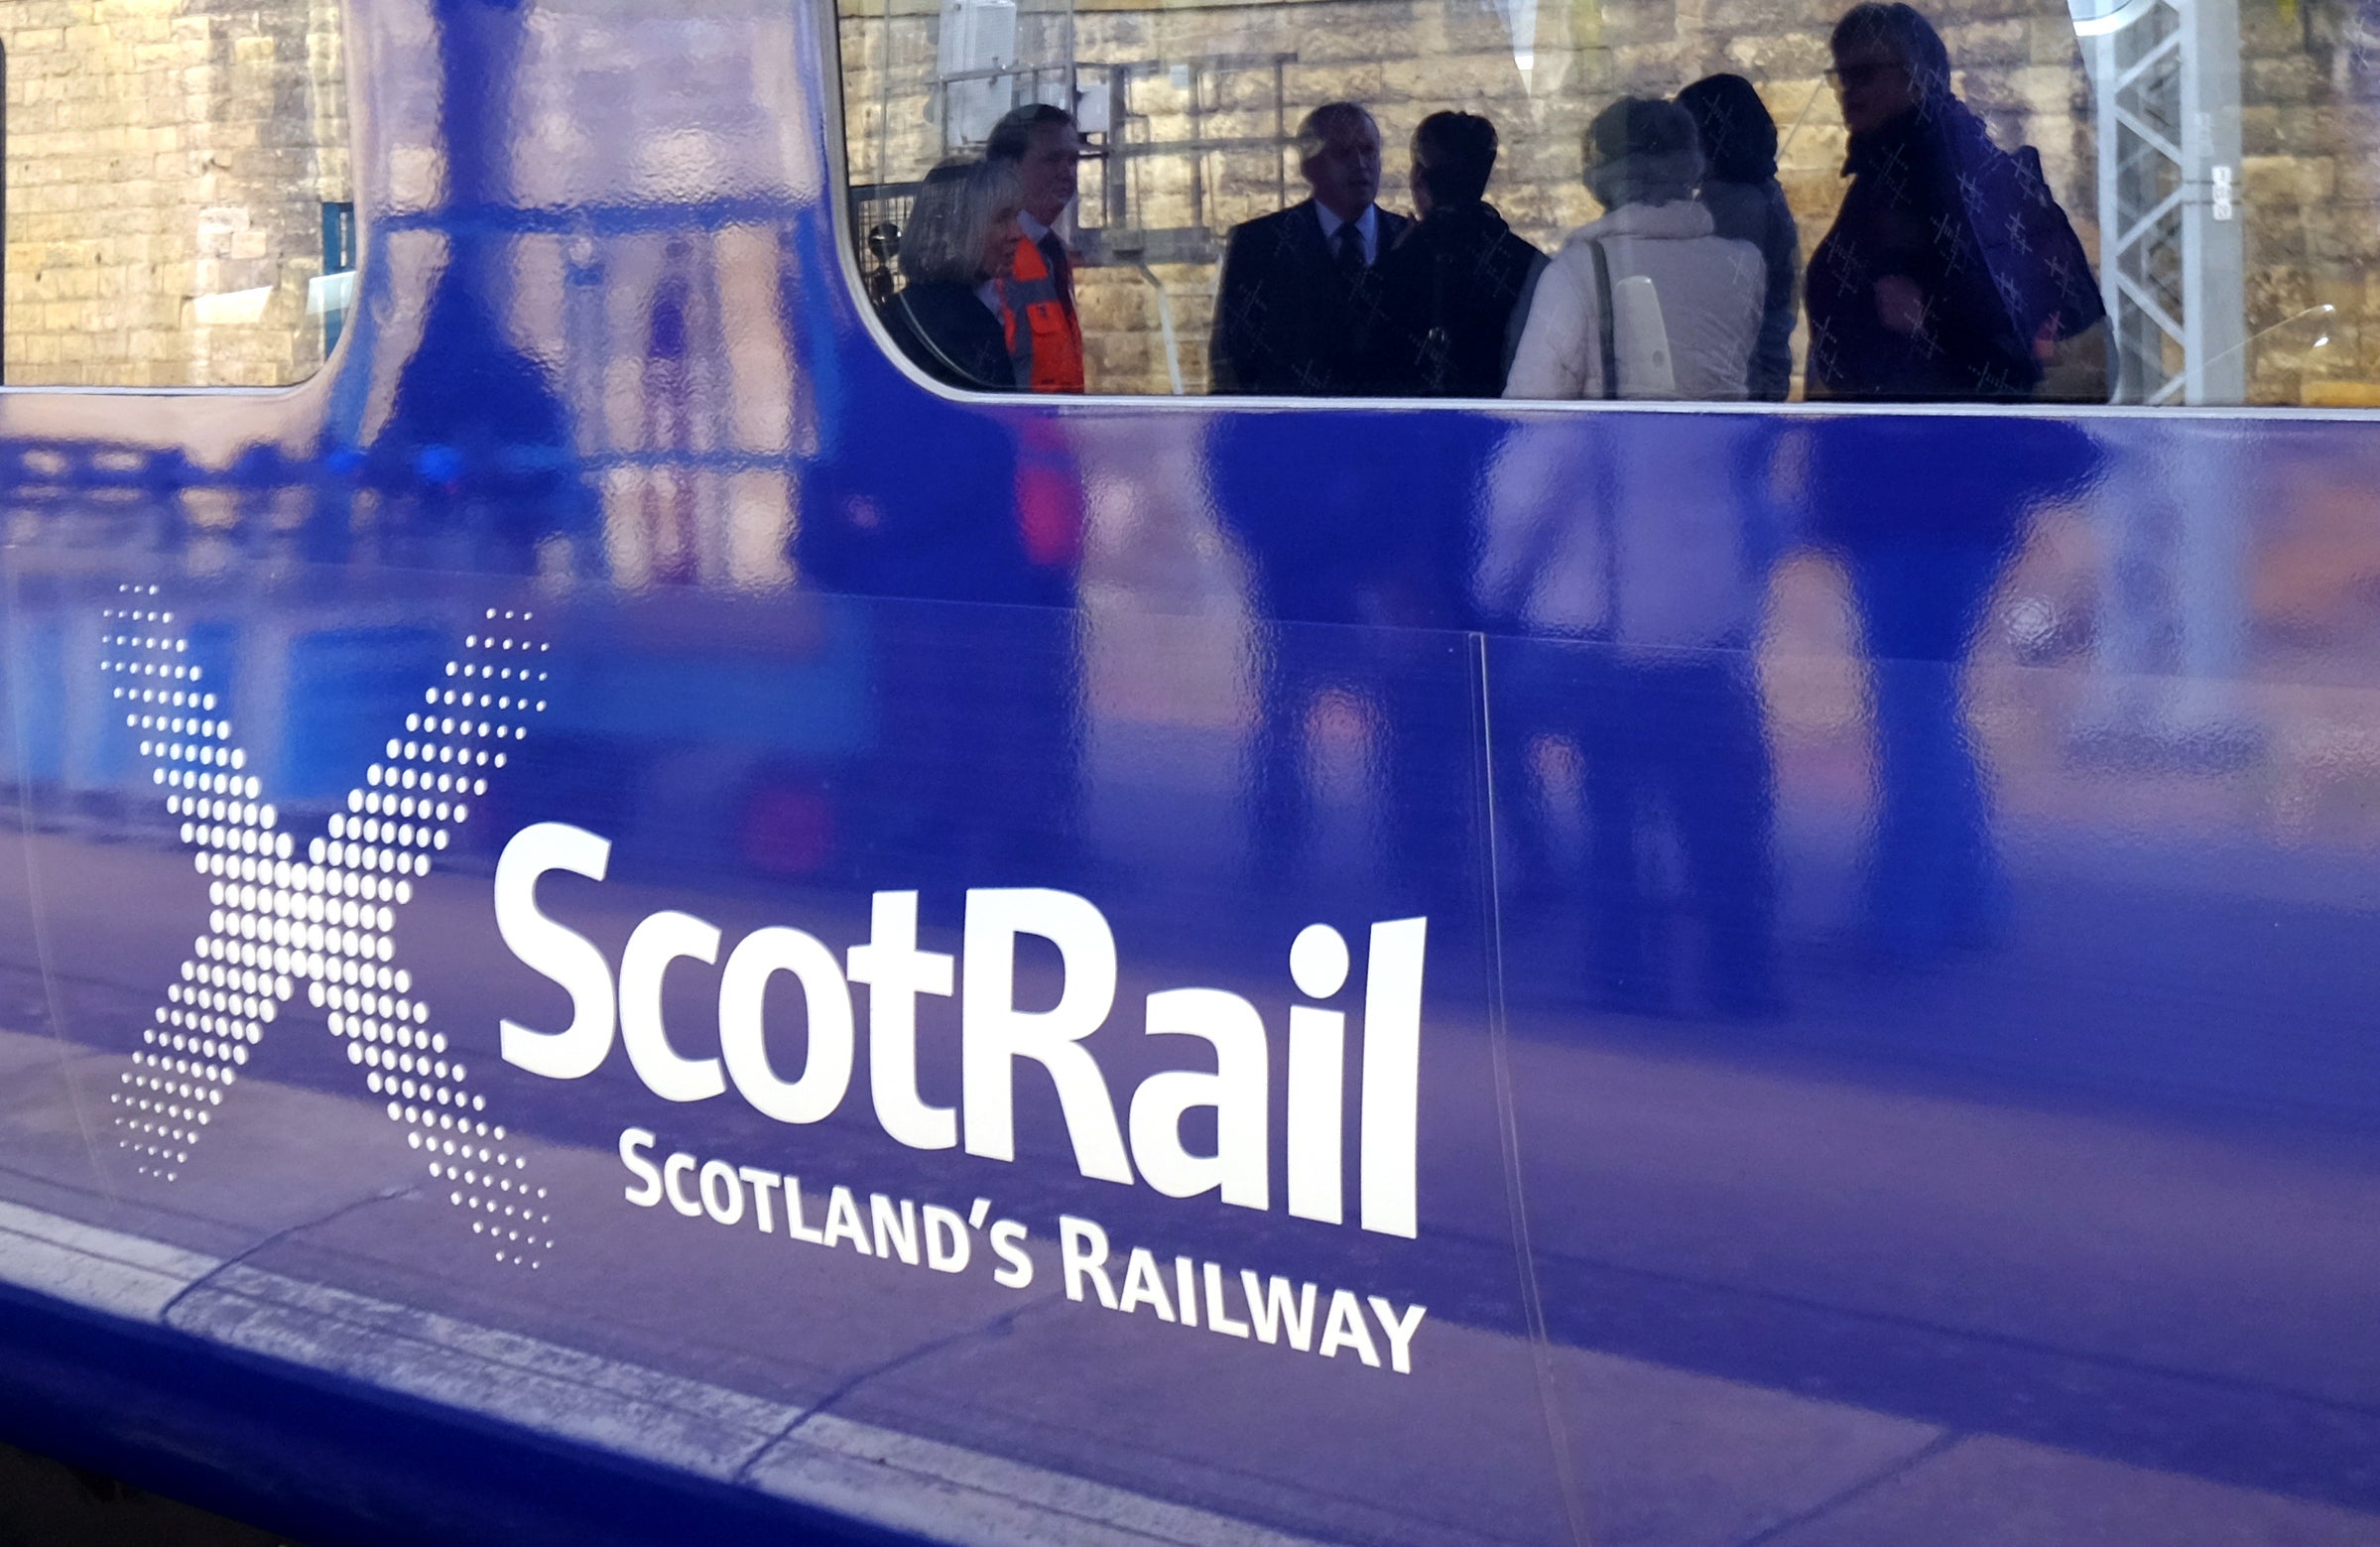 More than 700 ScotRail services have been cut across the country (Jane Barlow/PA)